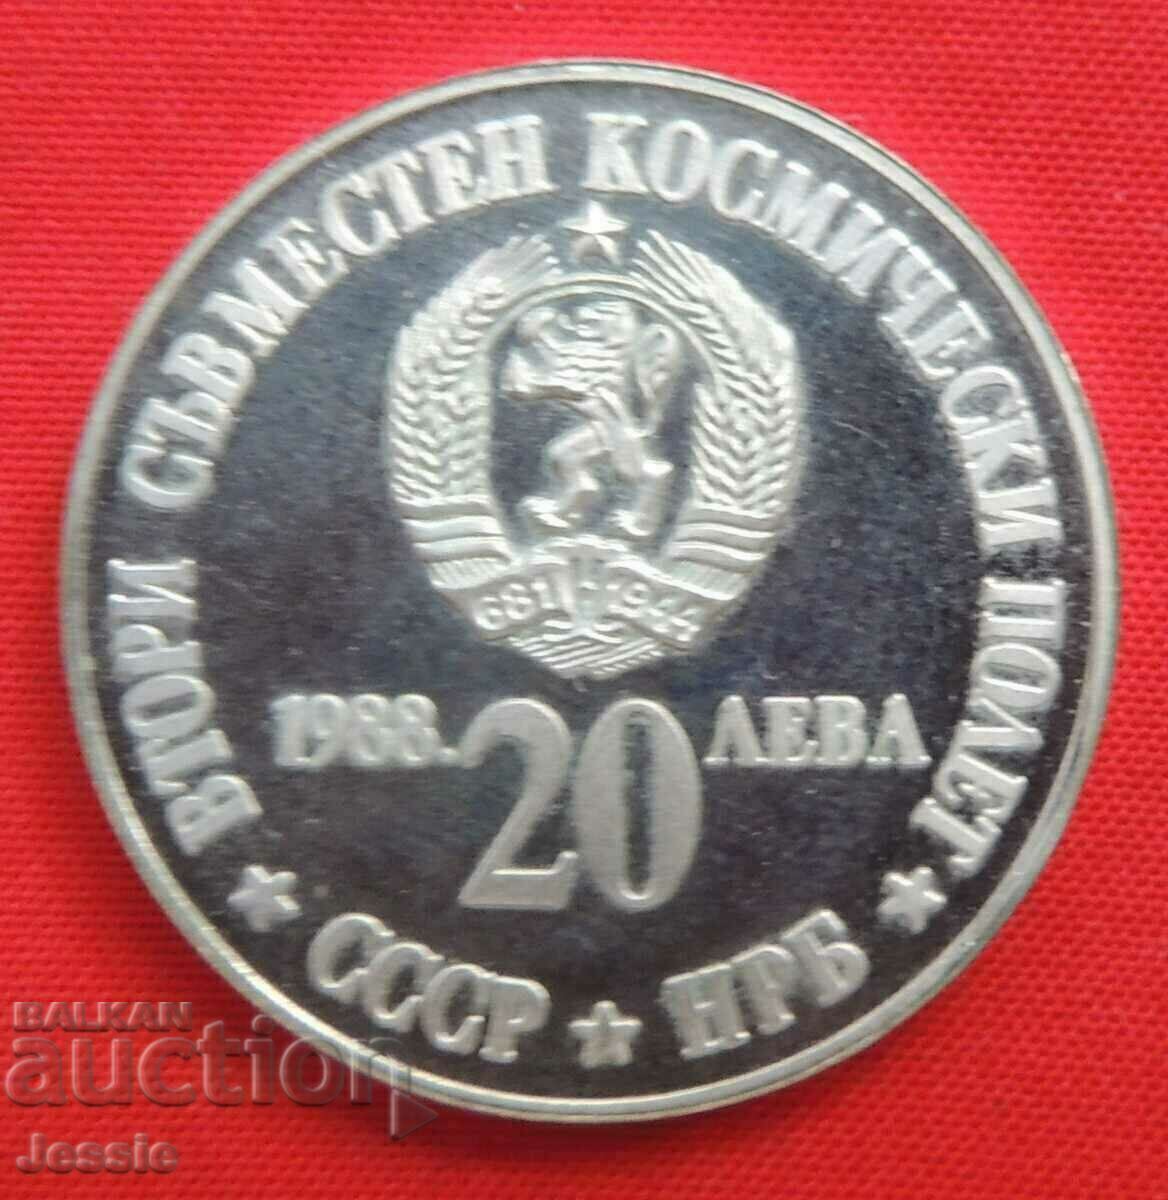 BGN 20 1988 Second Flight USSR- NRB MINT #1A SOLD OUT IN BNB